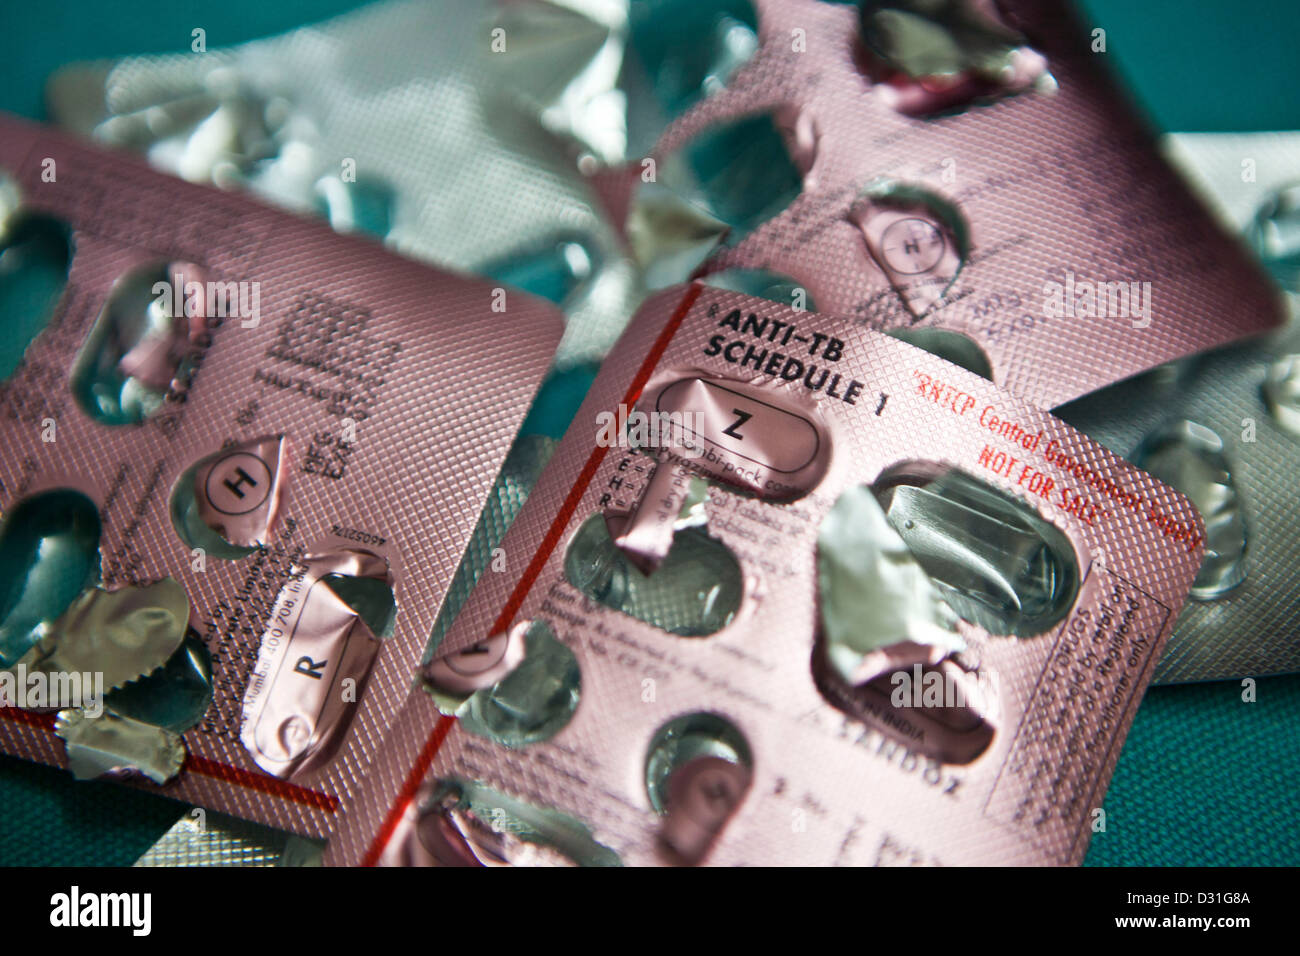 Empty blister-packs of patients Tuberculosis (TB) daily medication in a health clinic in Delhi, India. Stock Photo